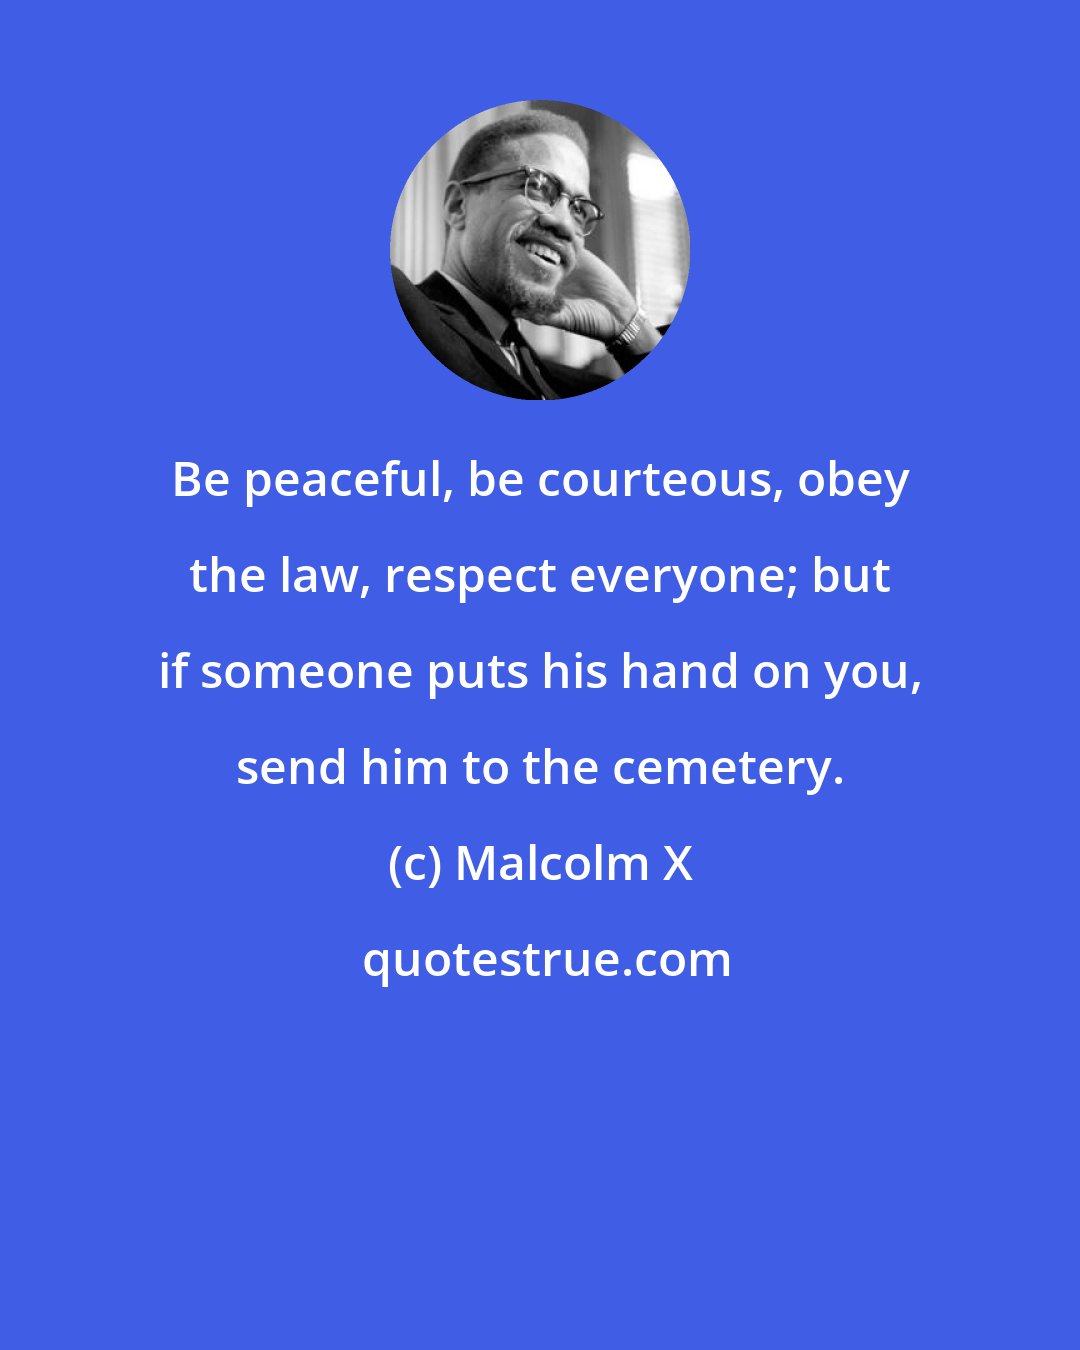 Malcolm X: Be peaceful, be courteous, obey the law, respect everyone; but if someone puts his hand on you, send him to the cemetery.